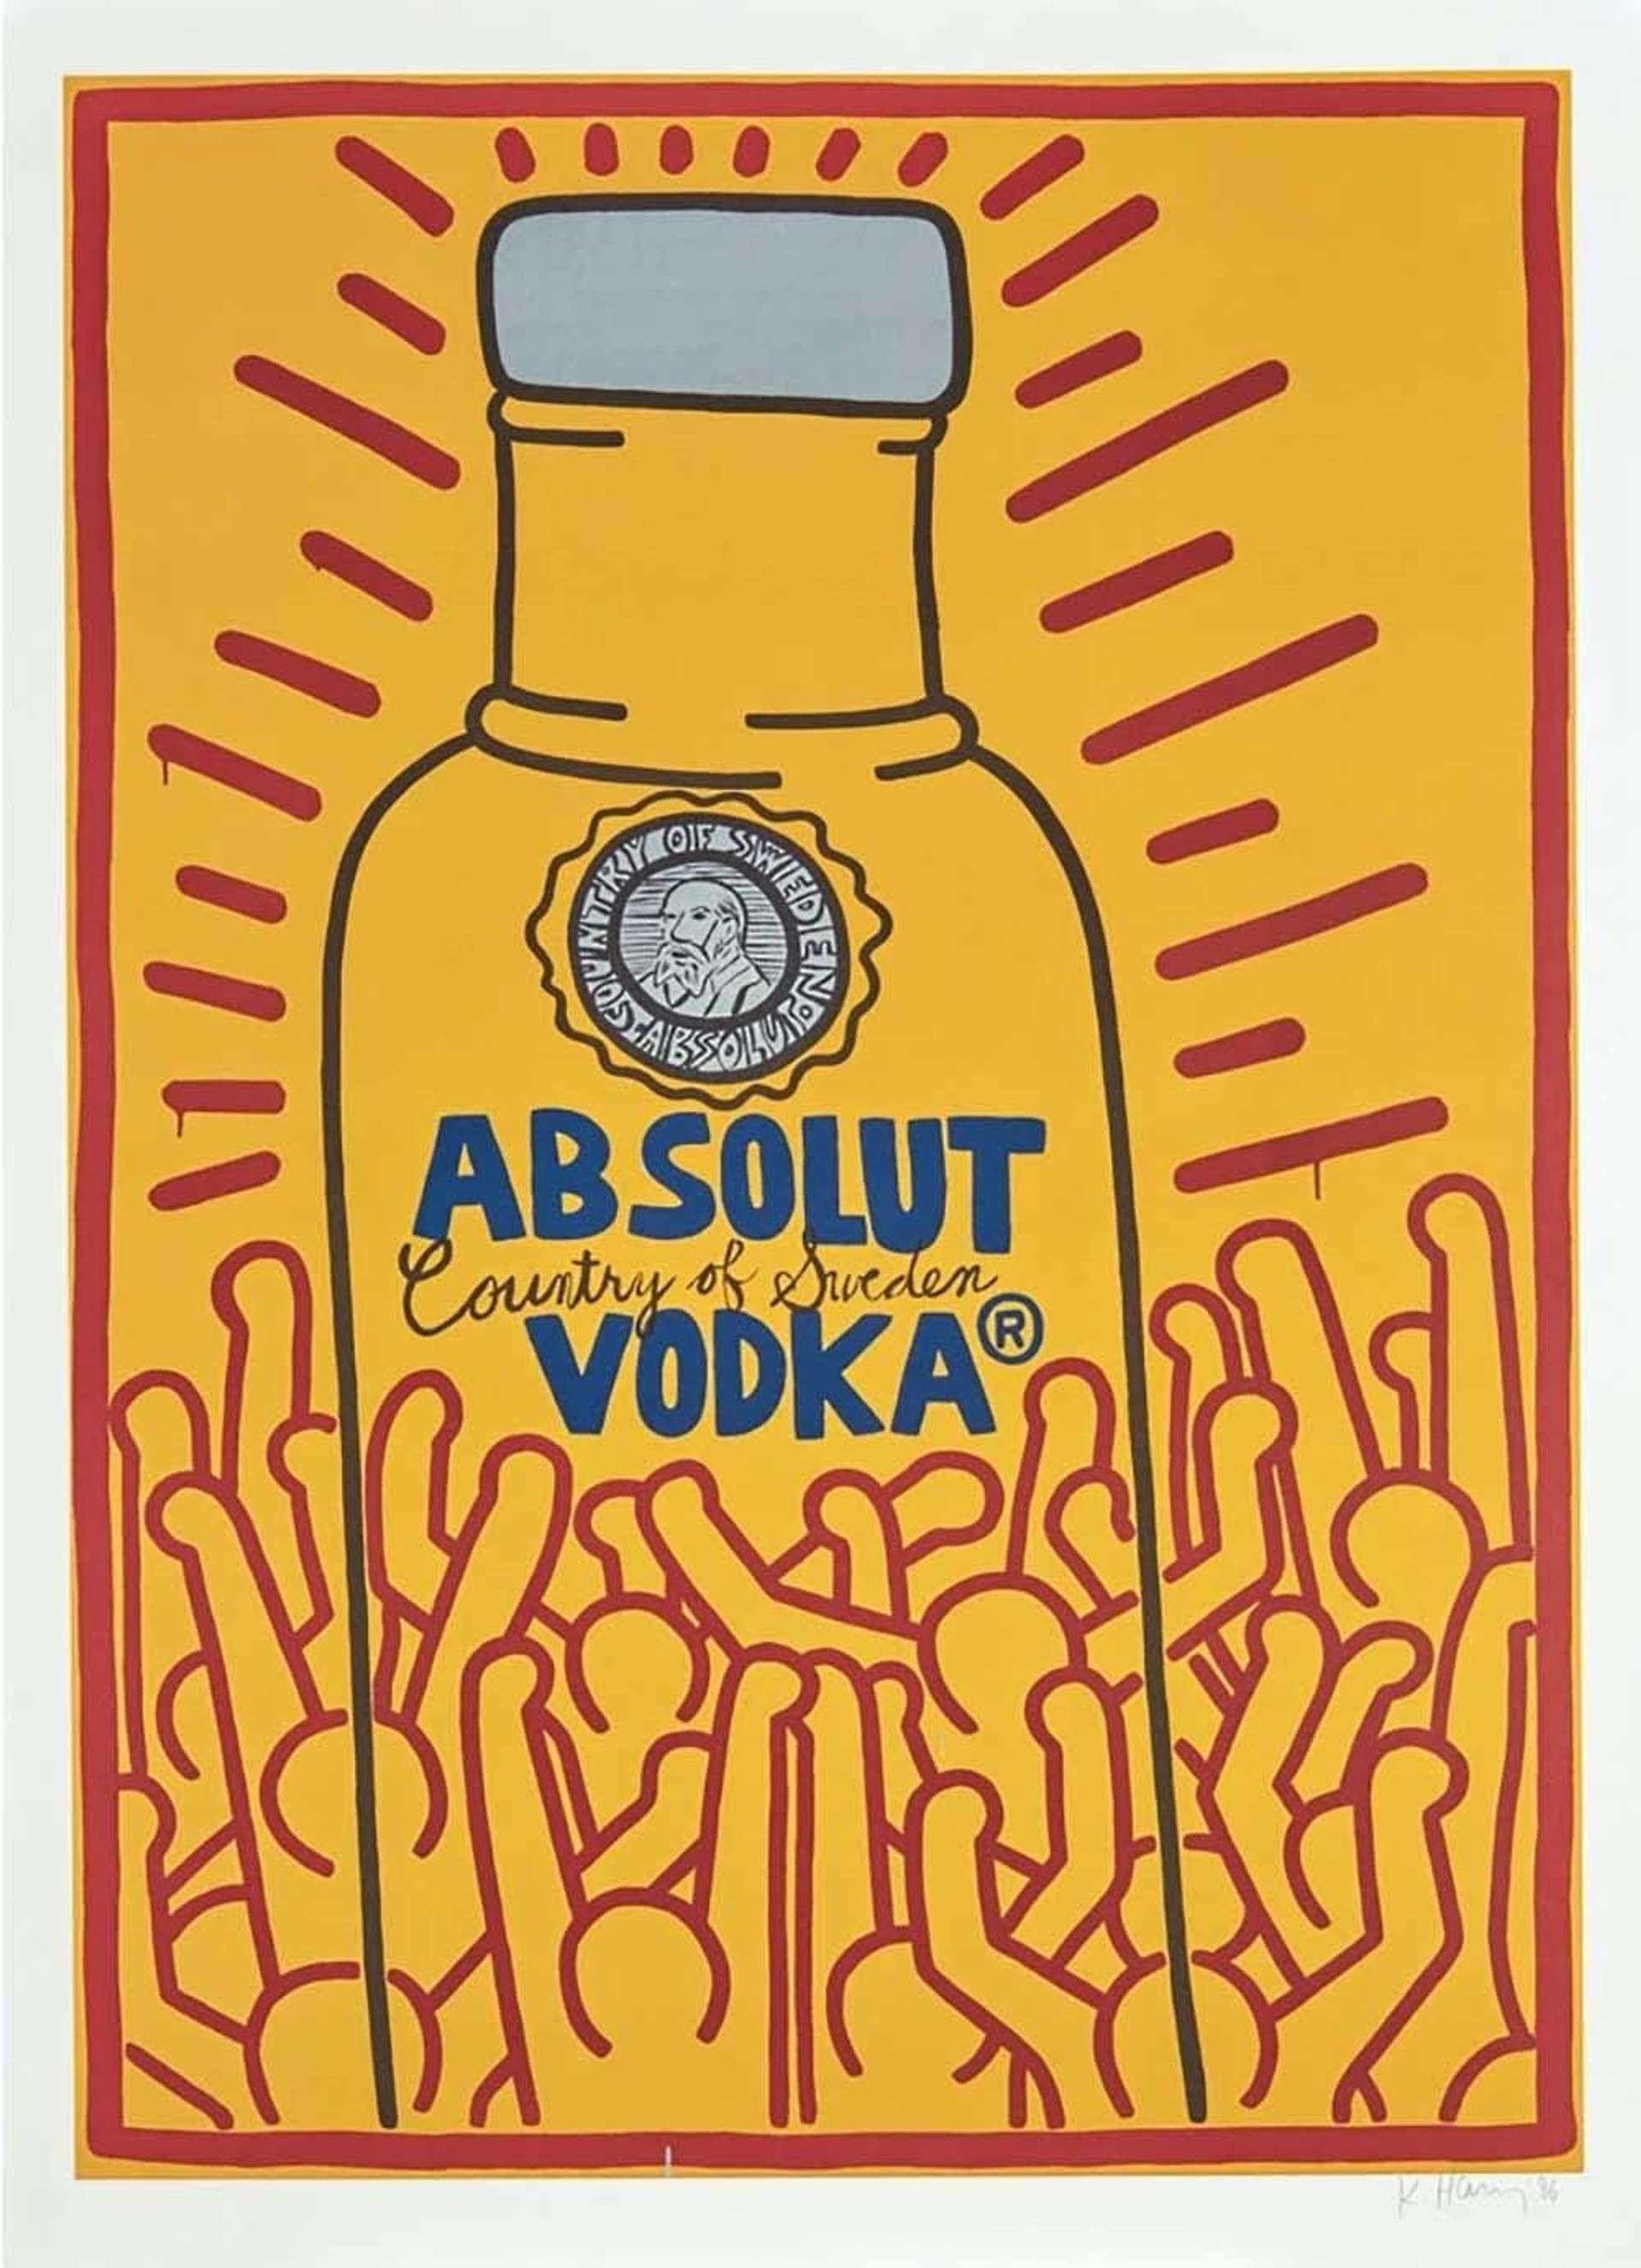 This signed lithograph from 1986 is a limited edition of 100 by Haring and shows the Absolut Vodka bottle rendered in Haring’s trademark bold lines, surrounded by a crowd of genderless figures. Haring uses bold red outlines against a bright yellow backdrop that sets a contrast against the blue Absolut logo.